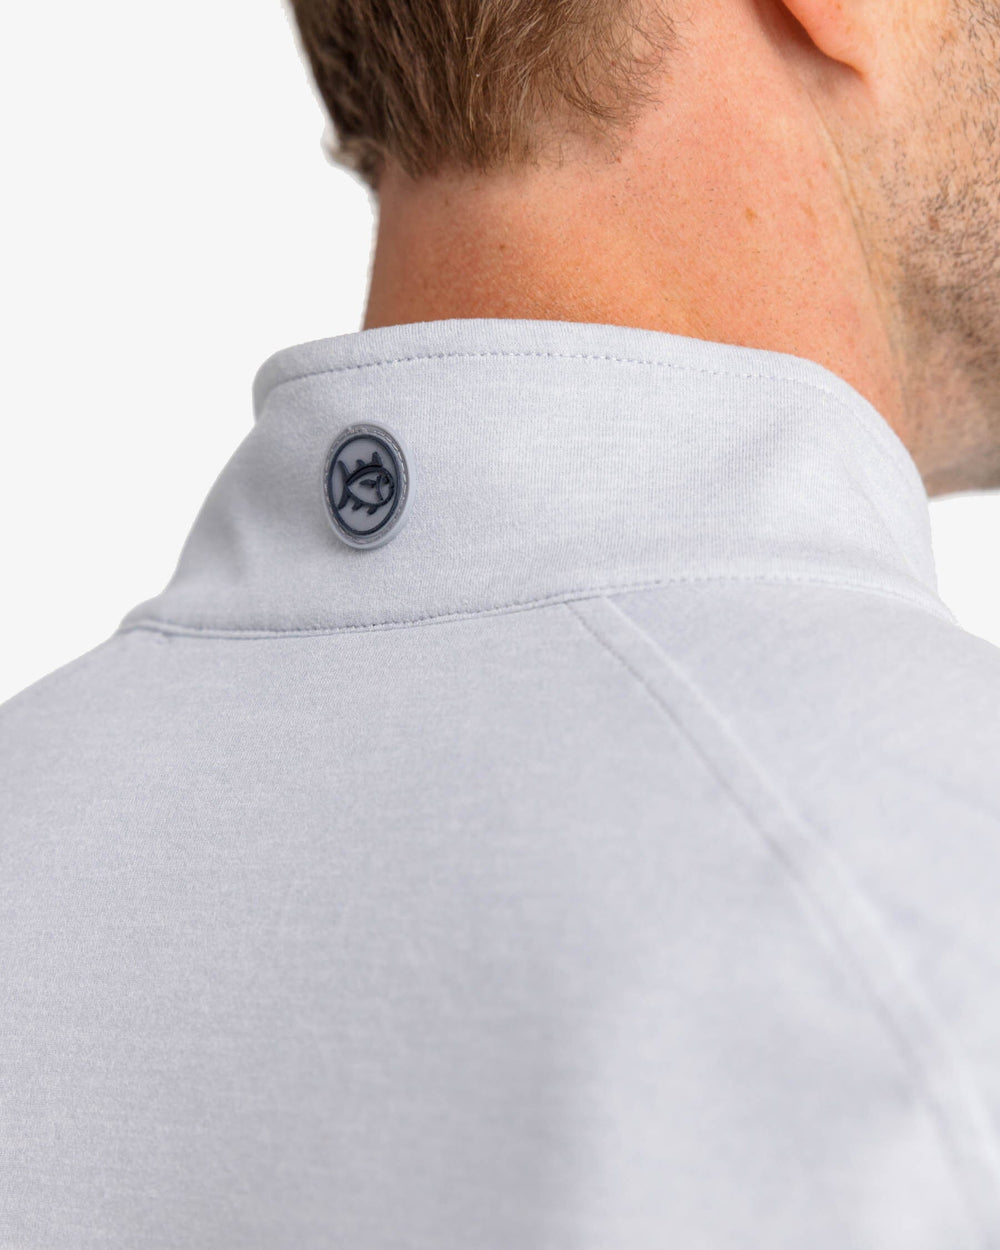 The yoke view of the Southern Tide Cruiser Heather Quarter Zip by Southern Tide - Heather Slate Grey